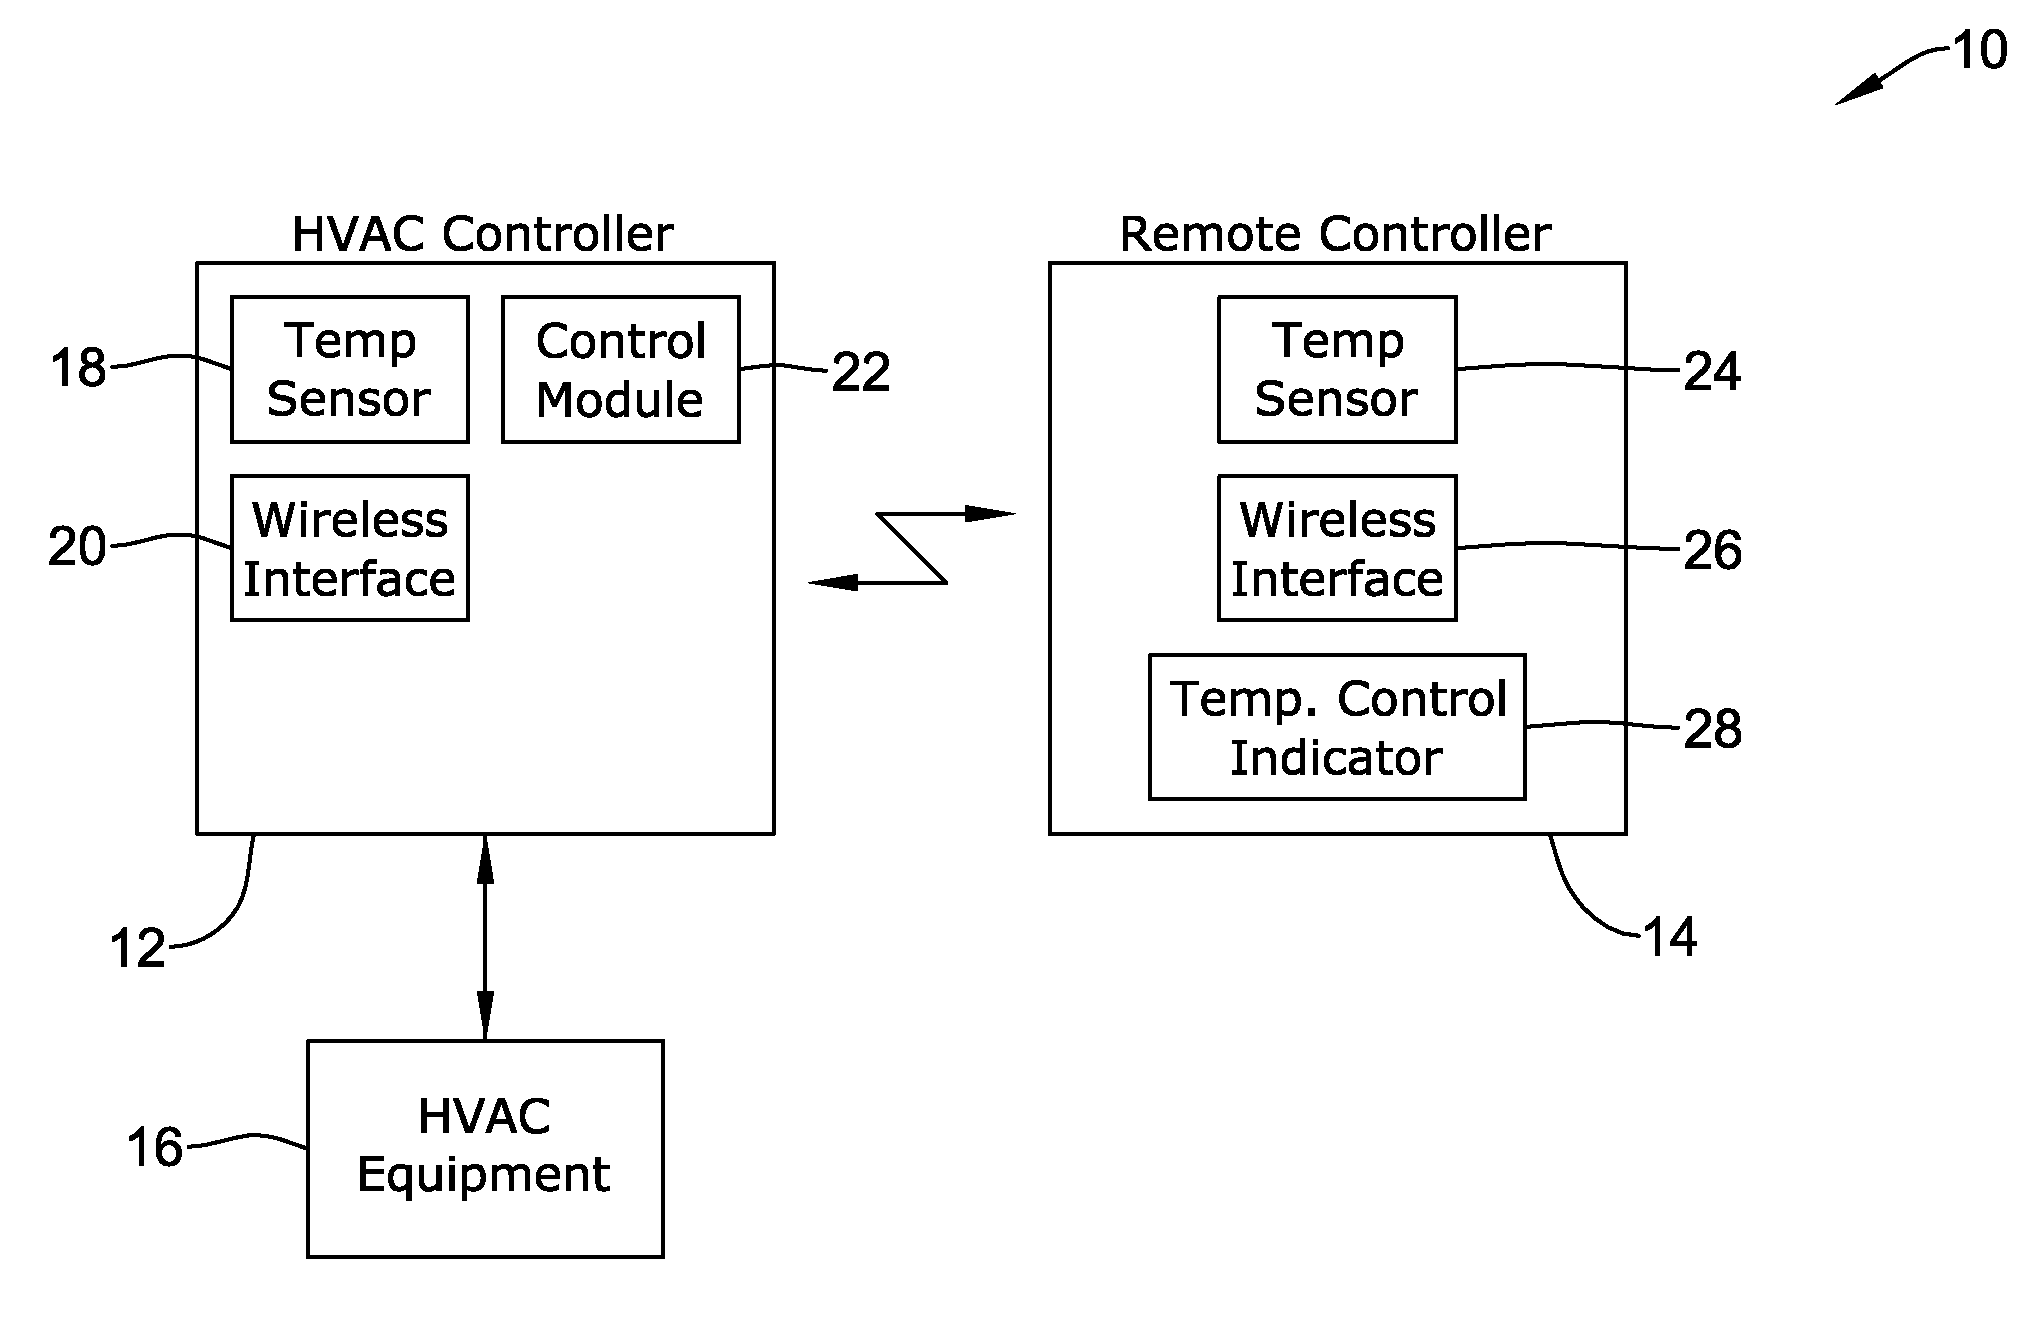 Building control system with remote control unit and methods of operation